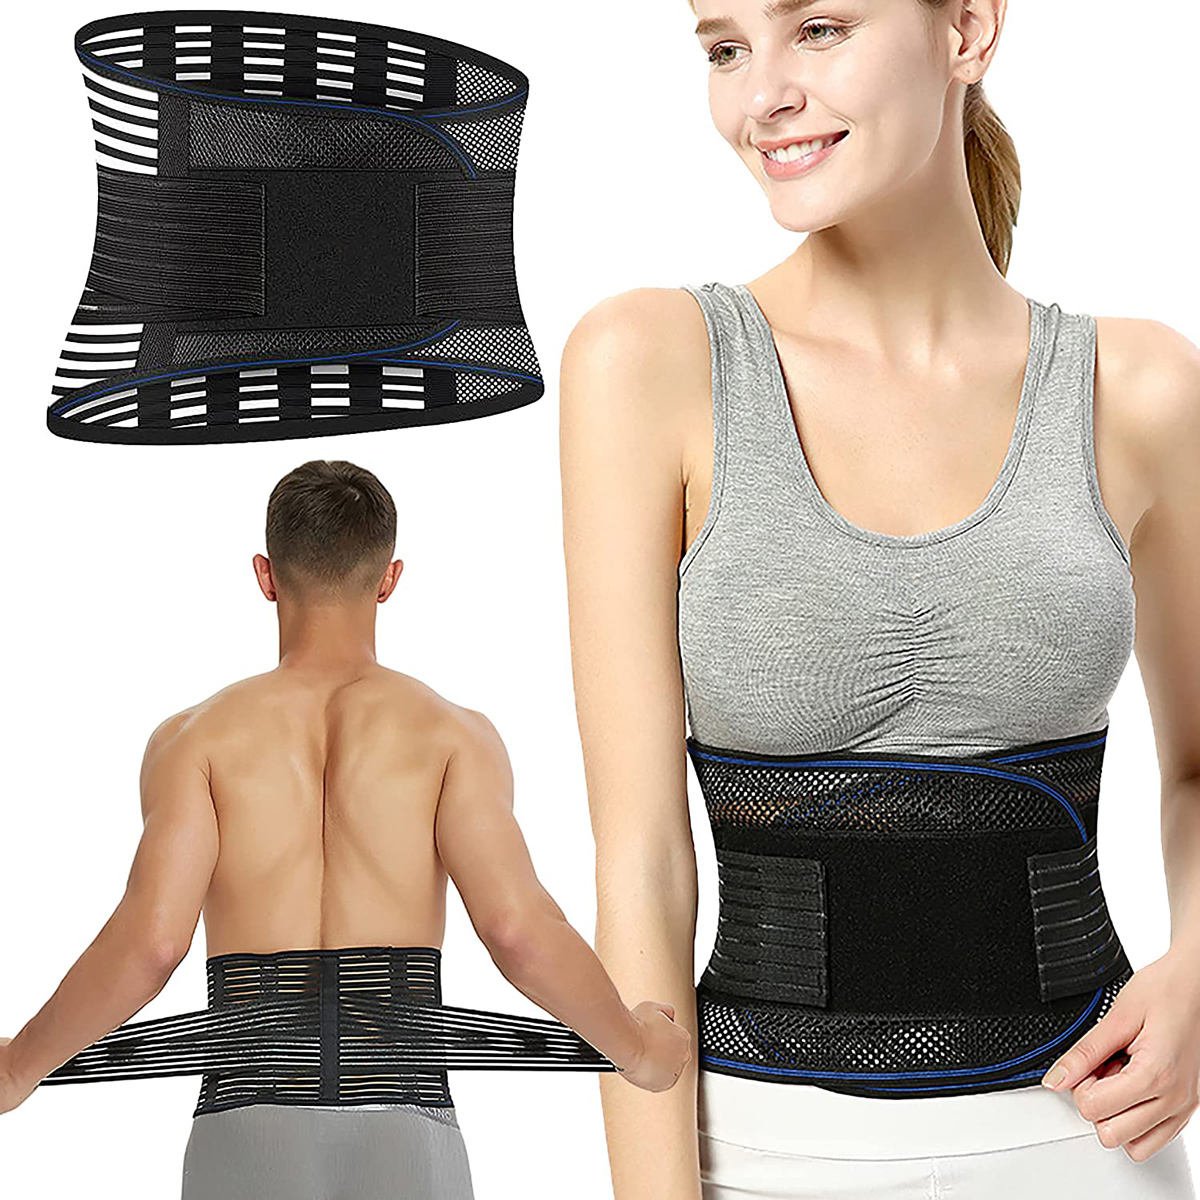 Lower Back Spine Support Lumbar - Home Essentials Store Retail